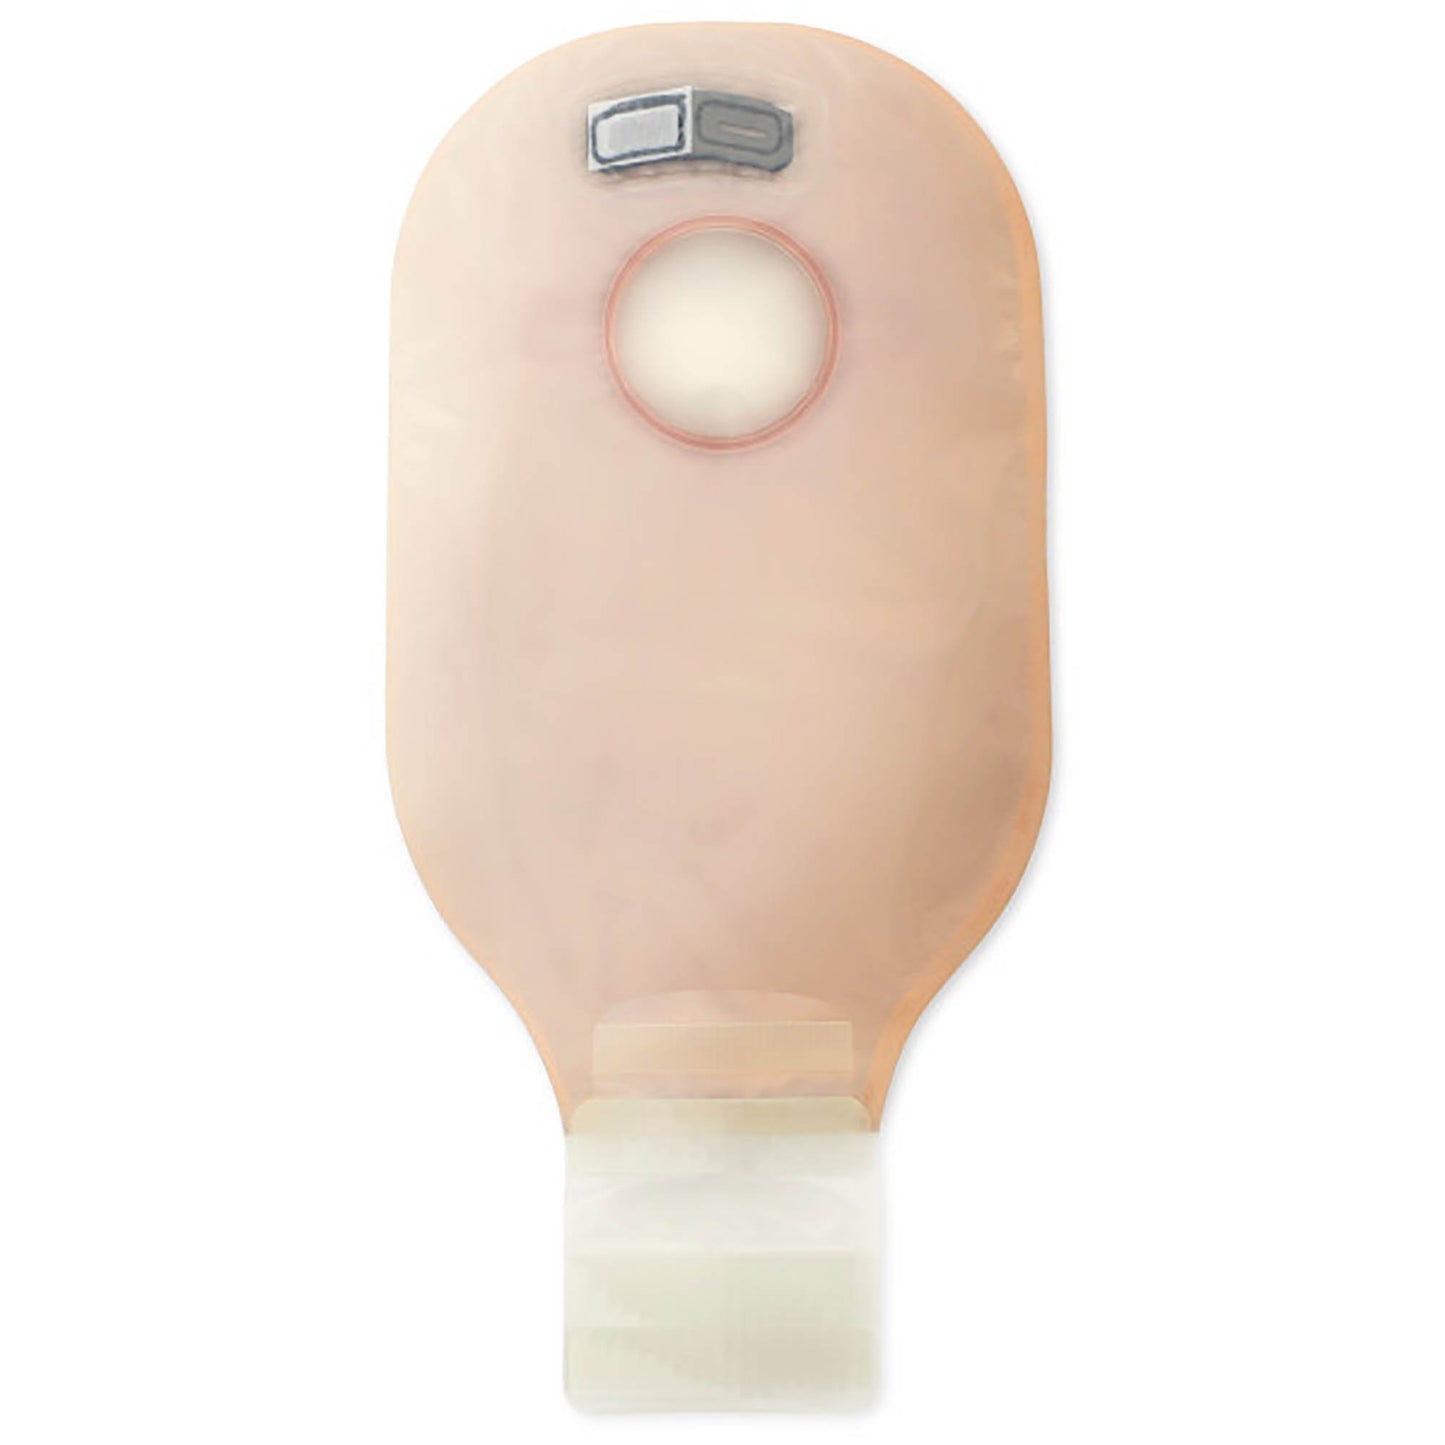 New Image™ Pouch, Ostomy Drainable With Transparent Filter, 57Mm (10/Bx)